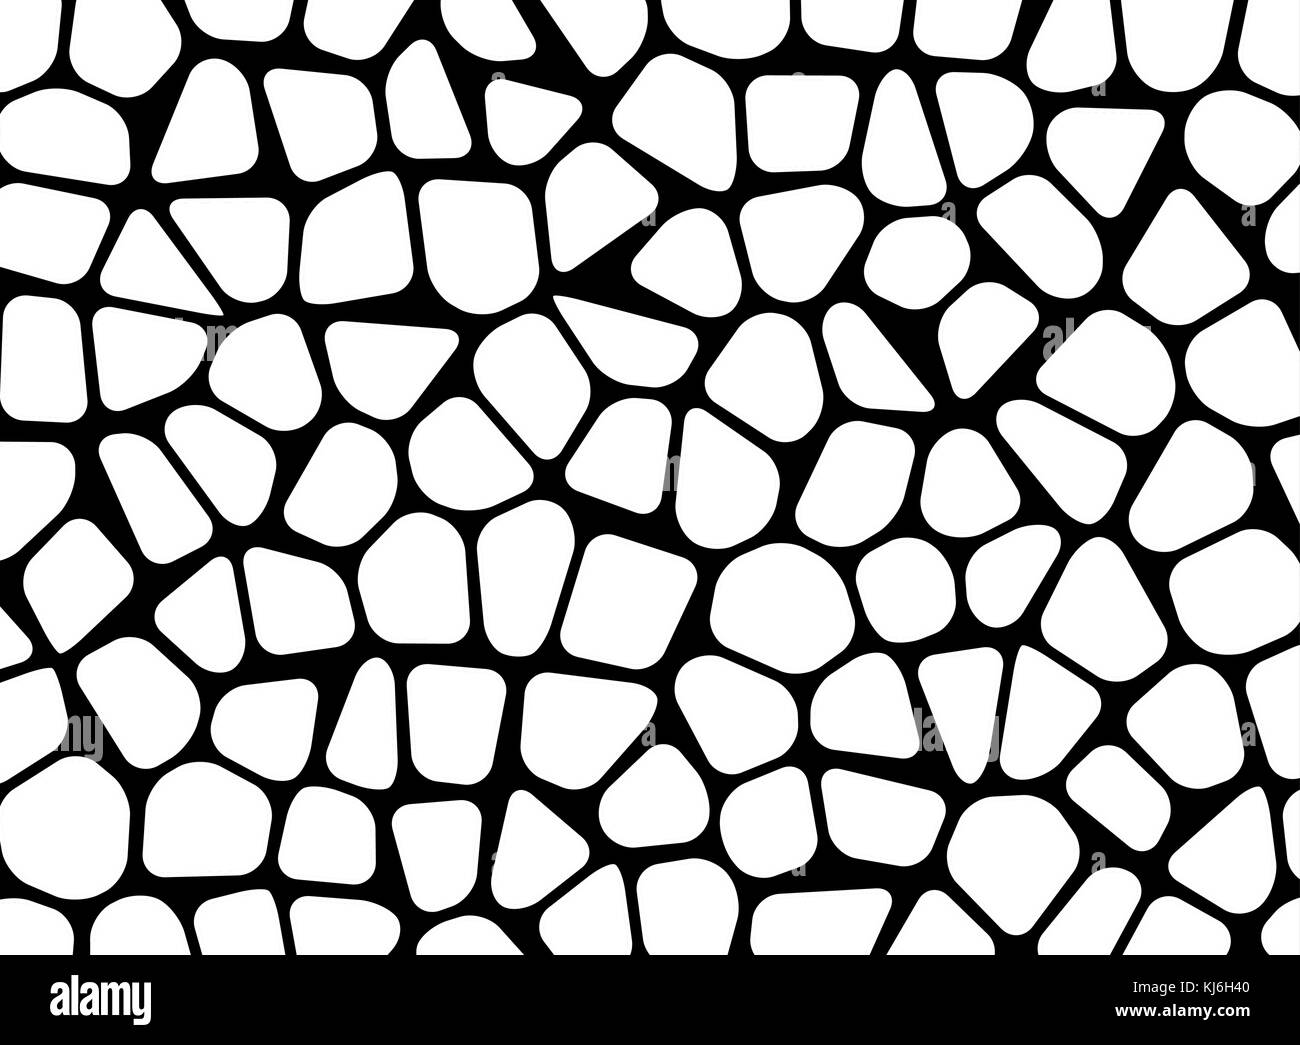 stone pebble texture silhouette mosaic vector background wallpaper Stock Vector